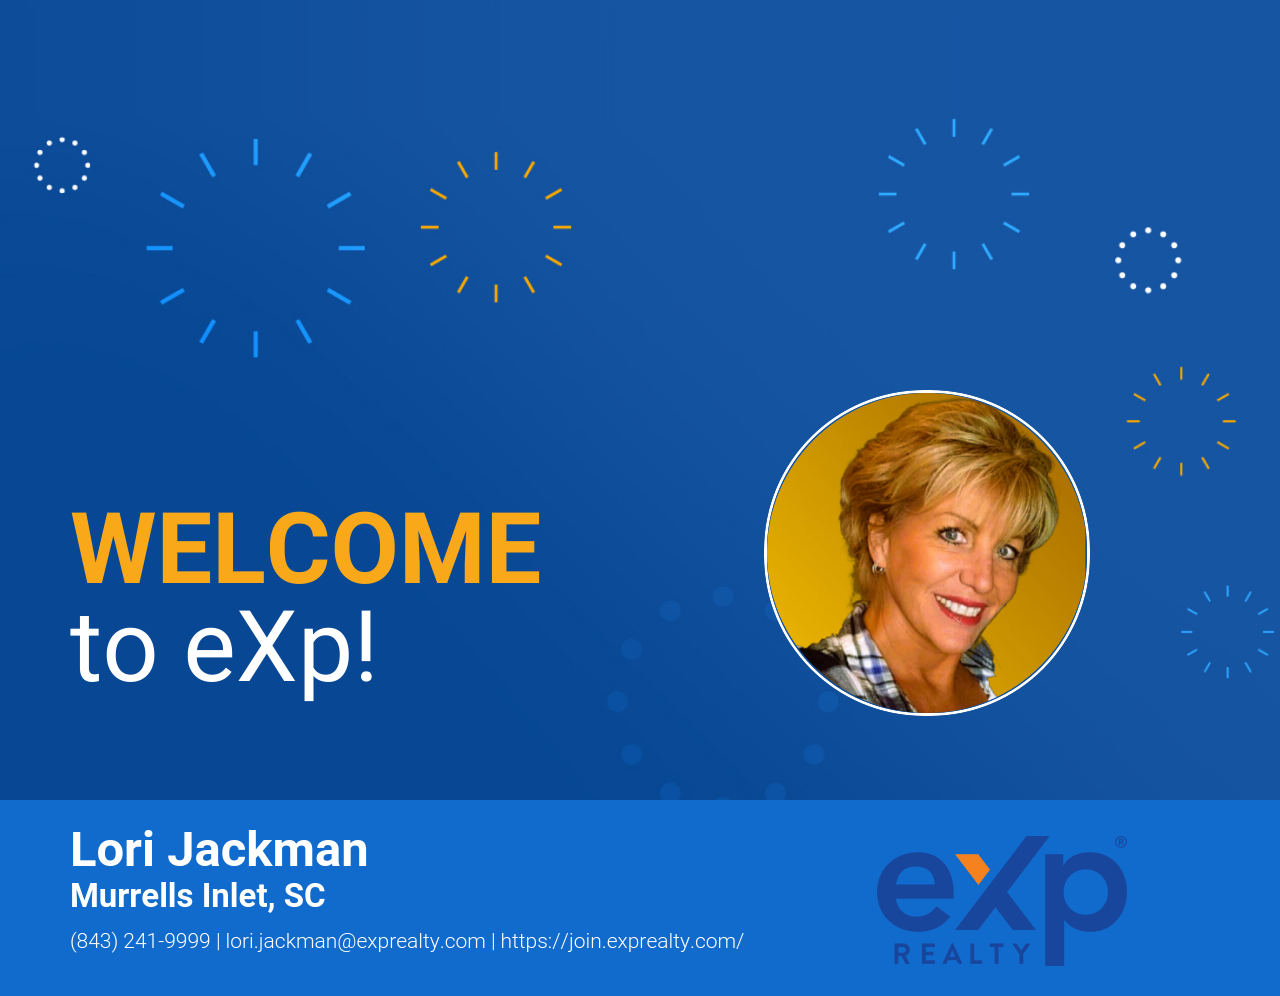 Lori Jackman Joined eXp Realty!